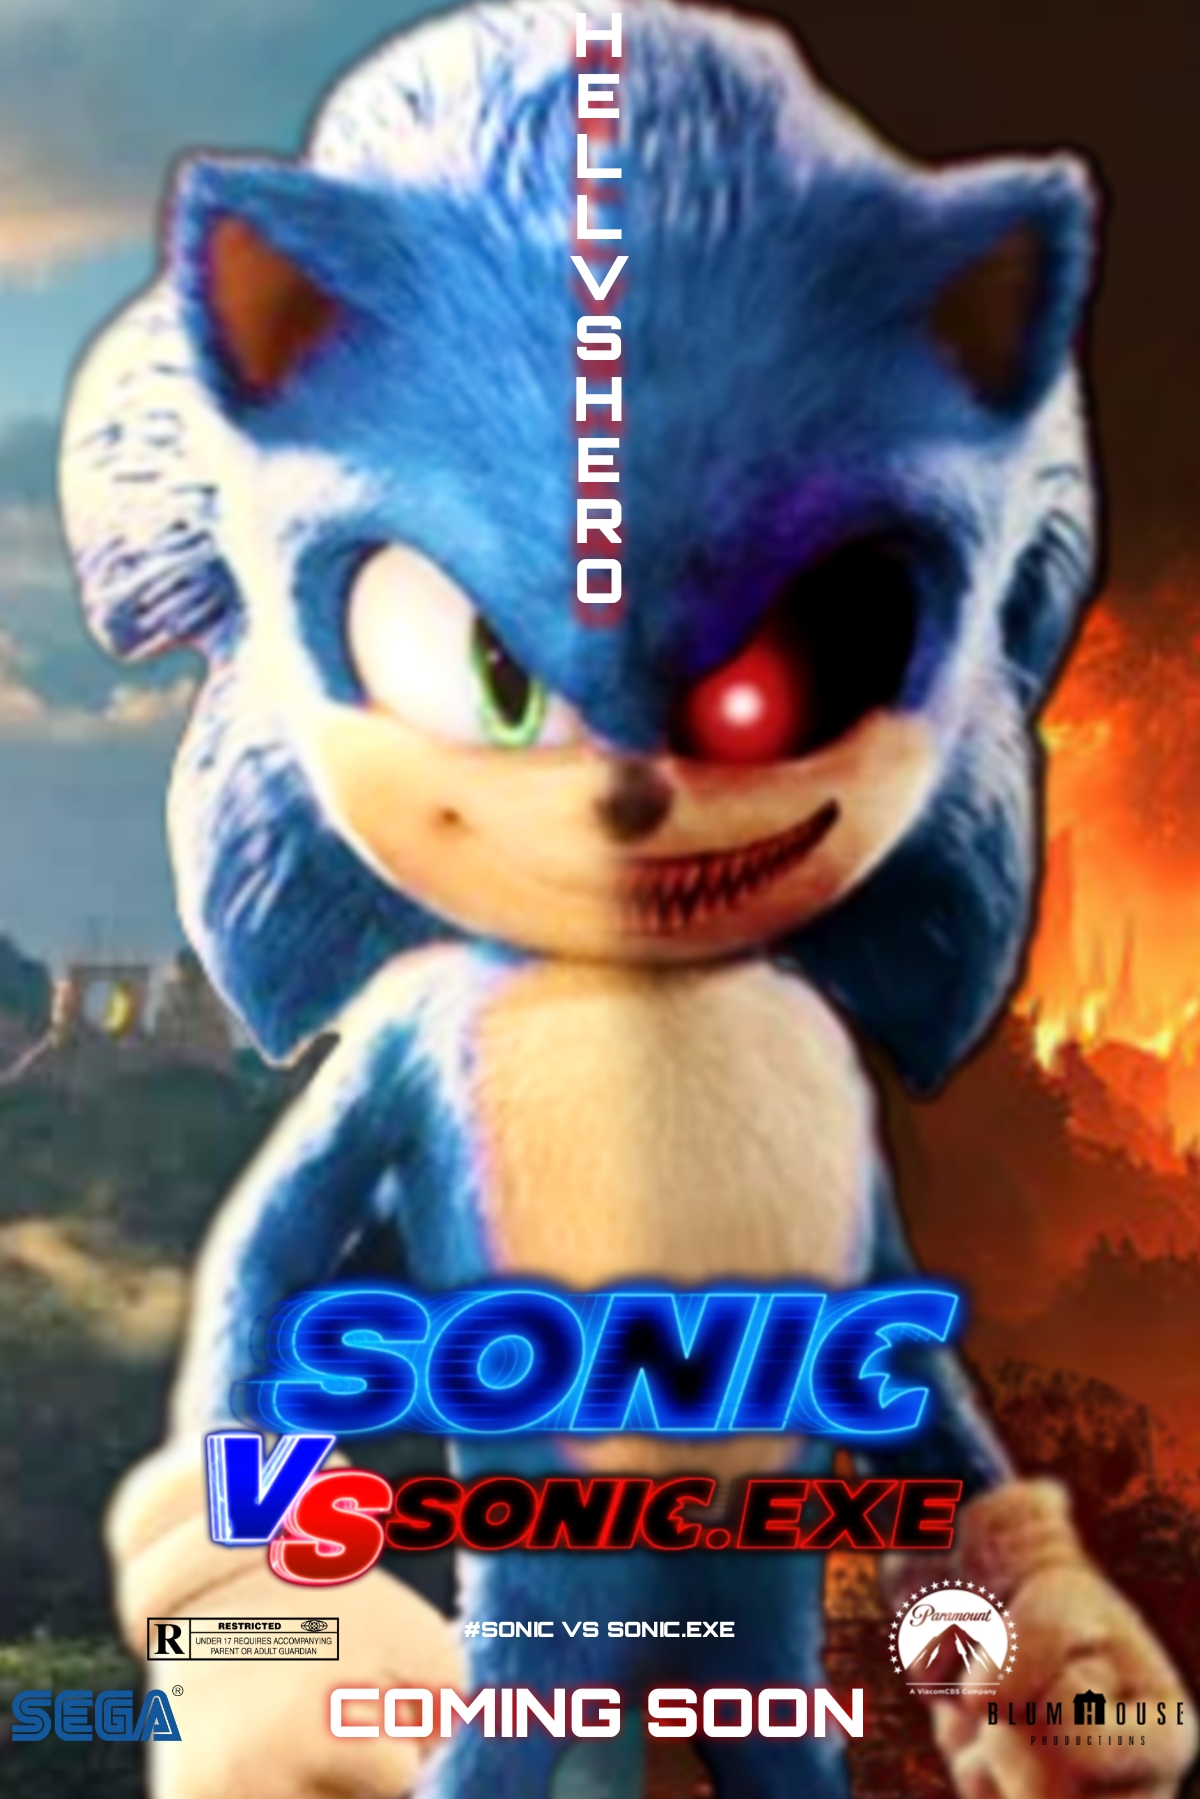 Sonic The Hedgehog Movie 4 fanmade poster by Nikisawesom on DeviantArt